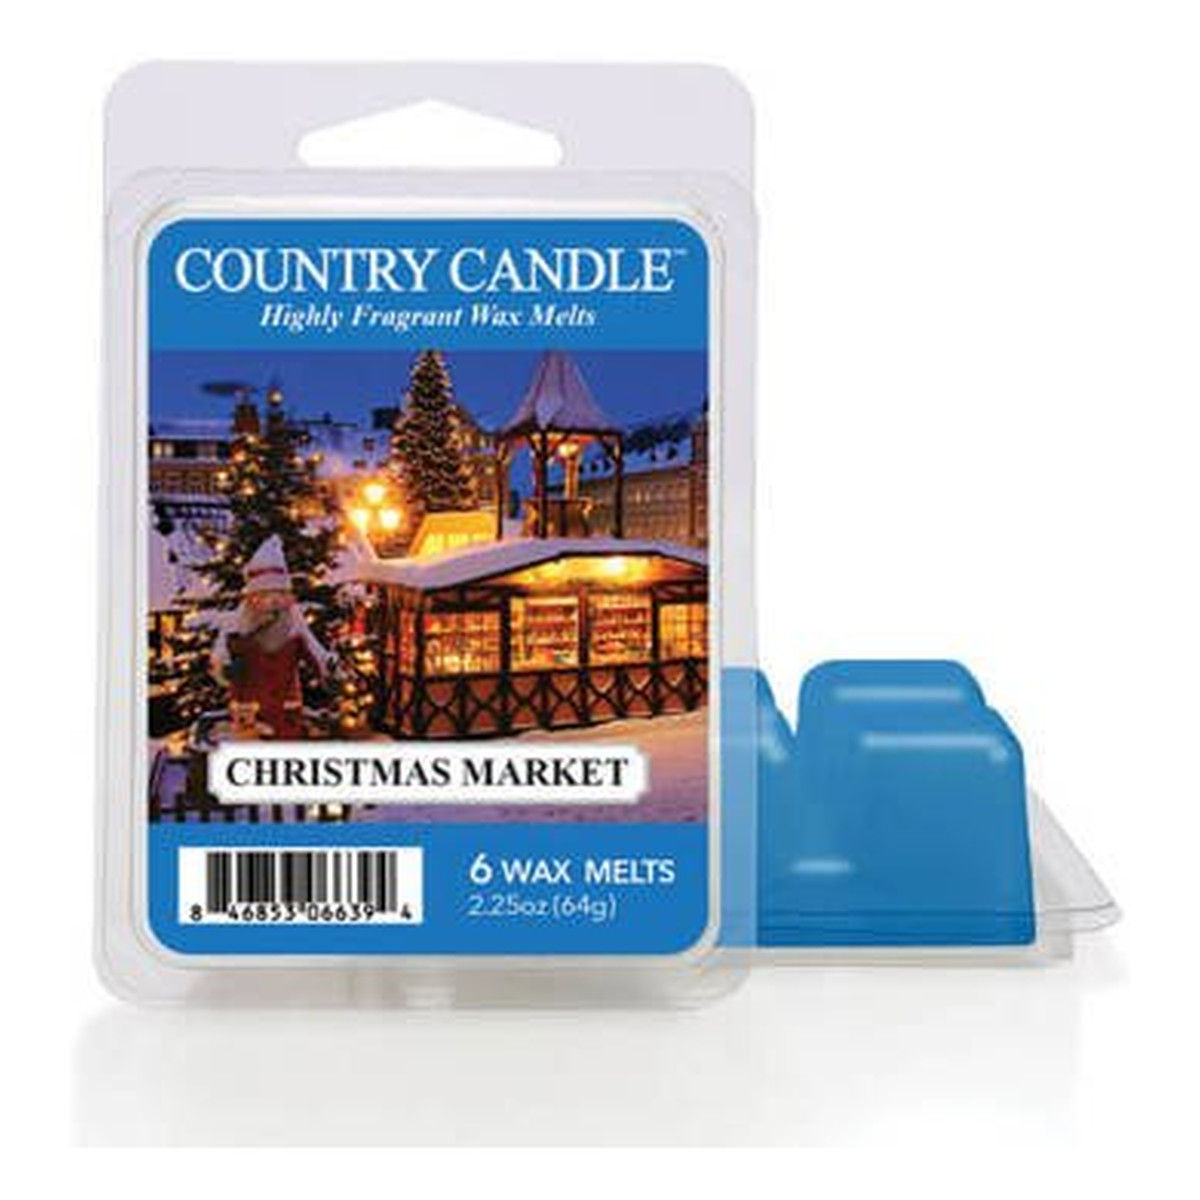 Country Candle Wax wosk zapachowy "potpourri" christmas market 64g